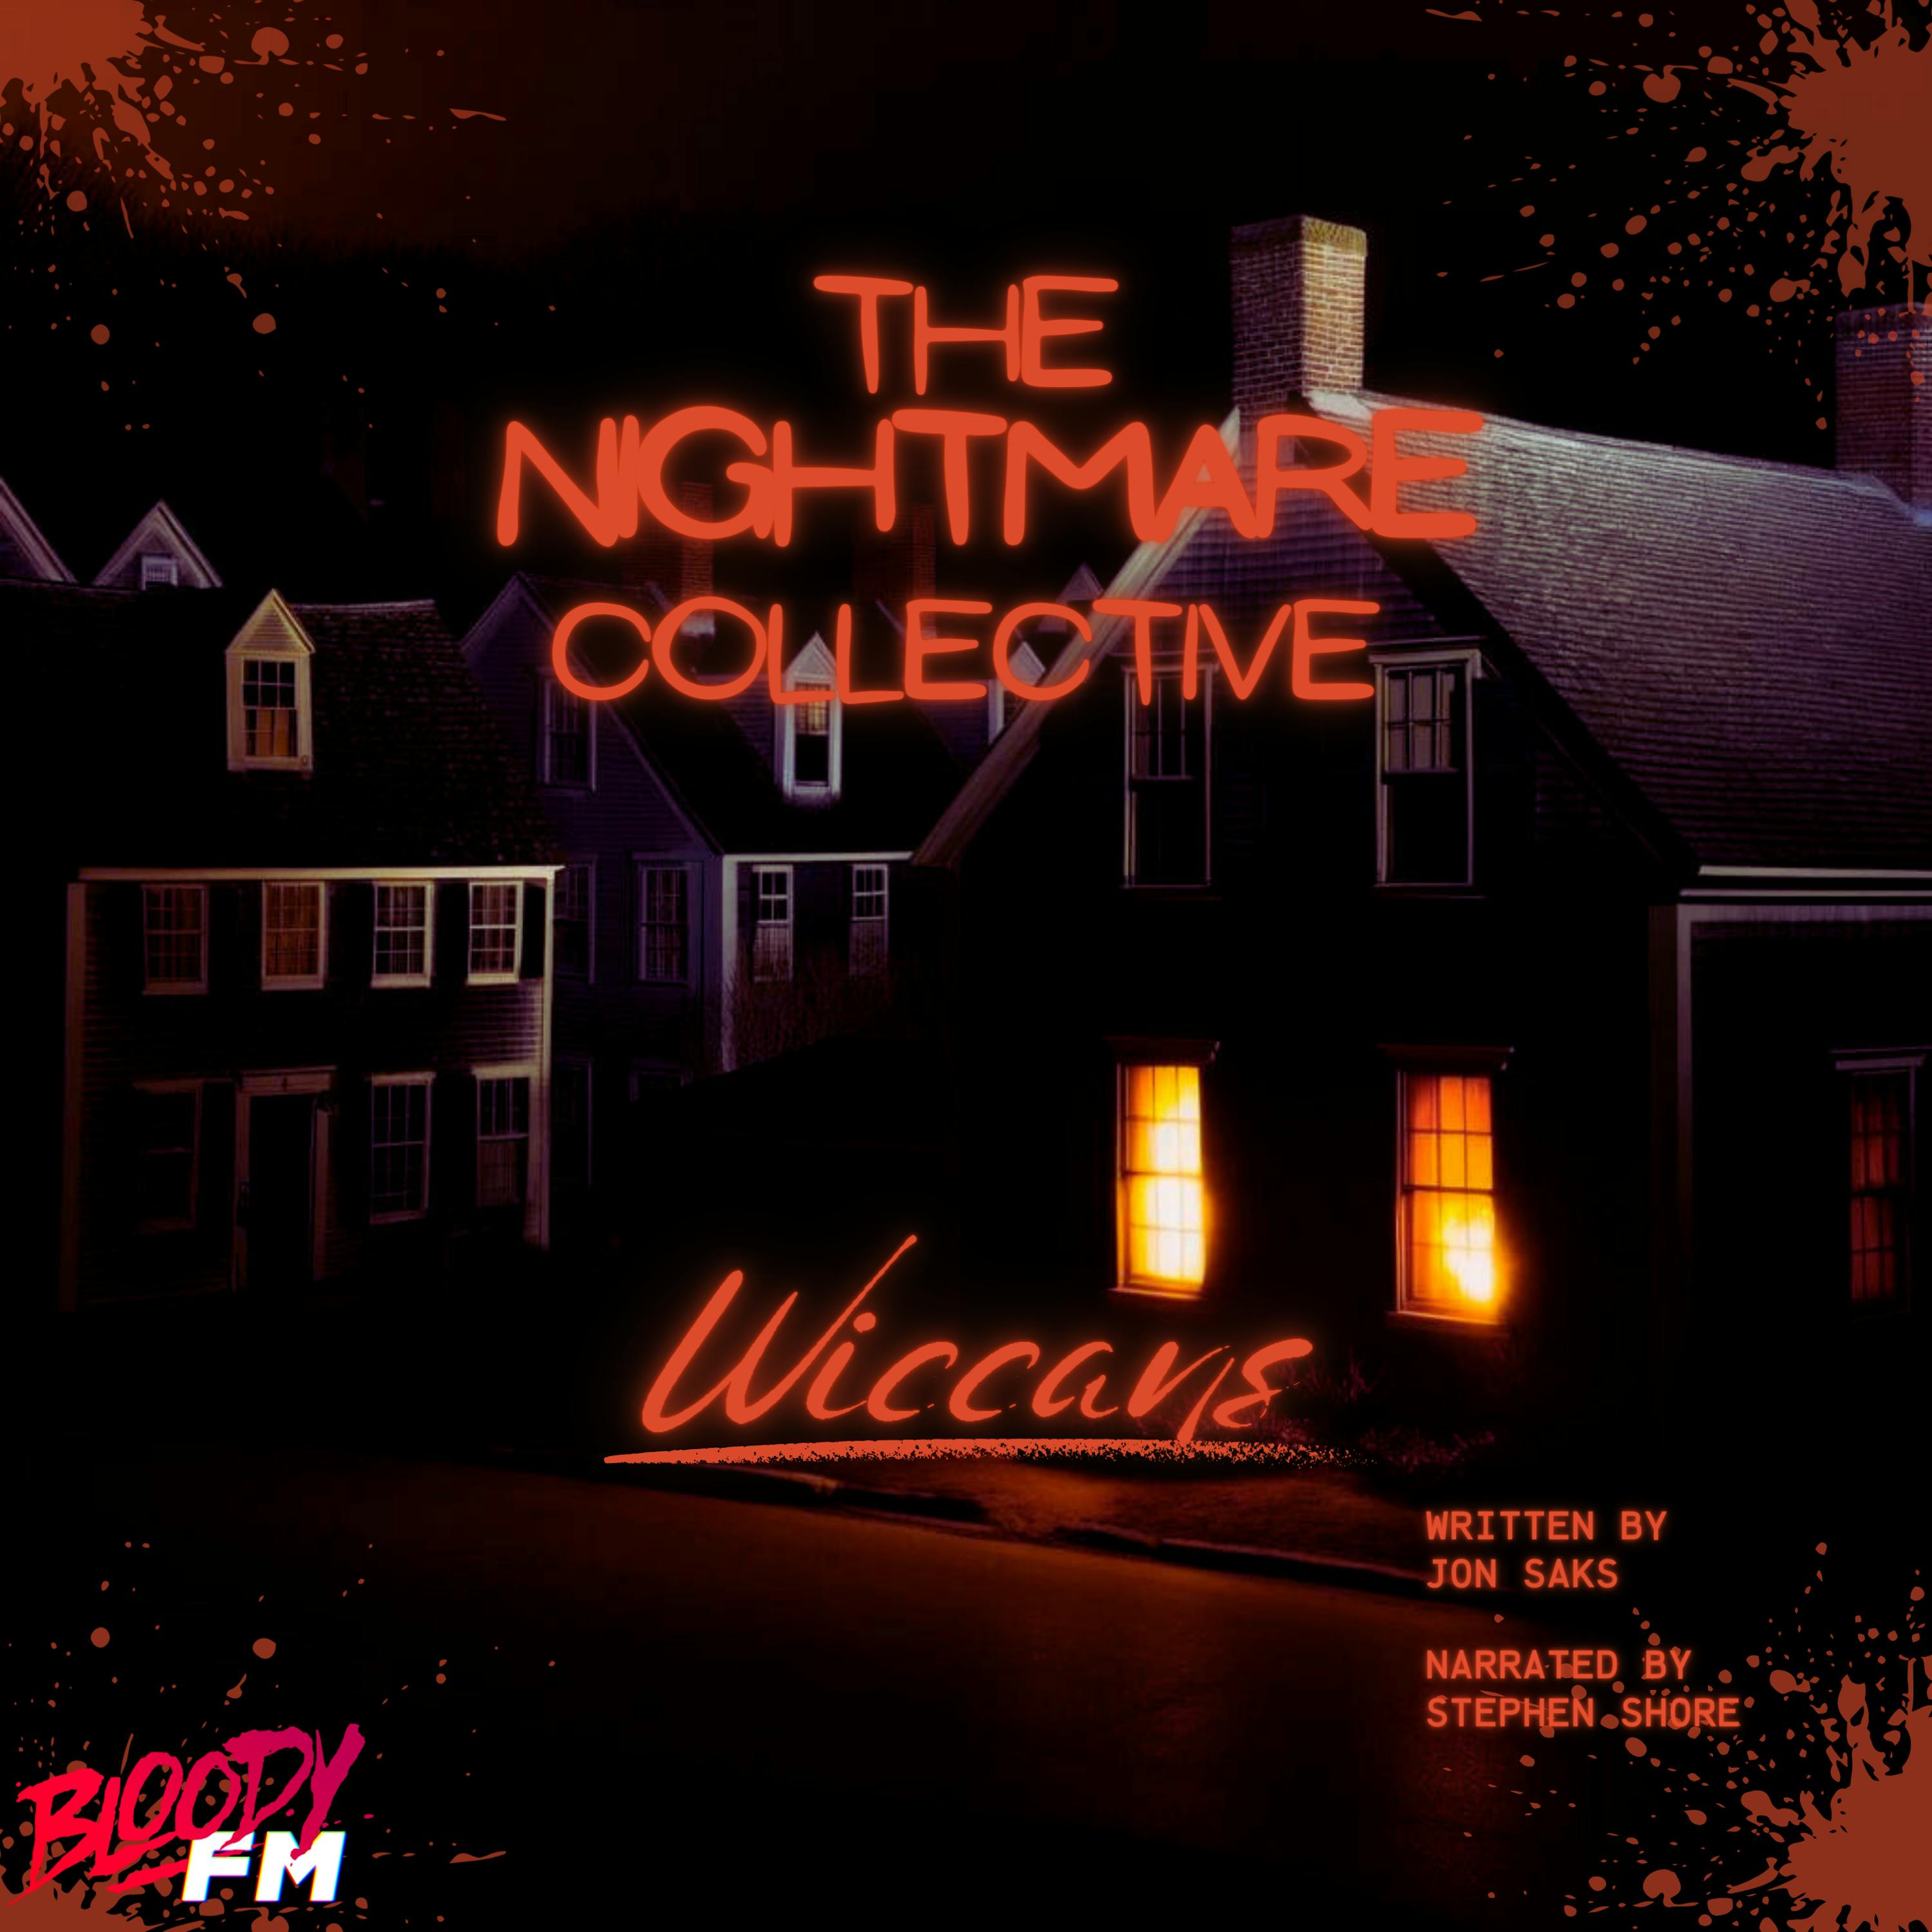 Presenting - The Nightmare Collective - Wiccans